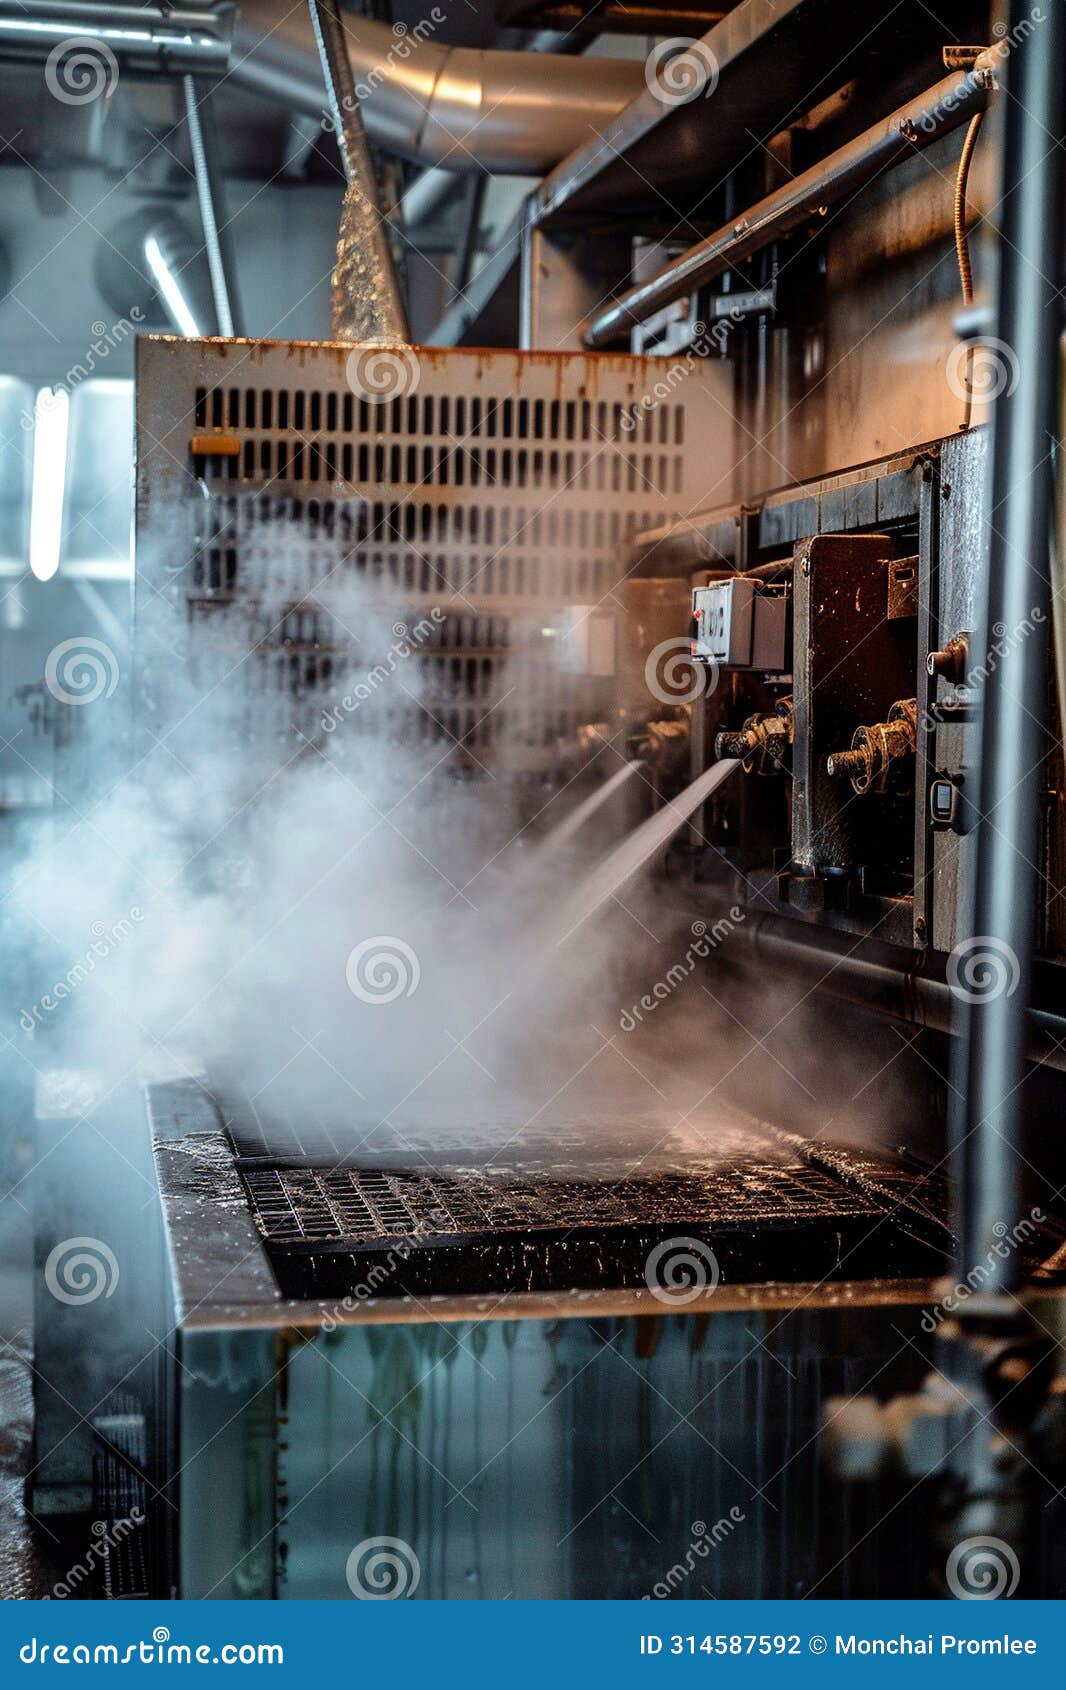 industrial equipment in action, using heat and steam to sterilize tools, effectively eliminating germs with thorough washing